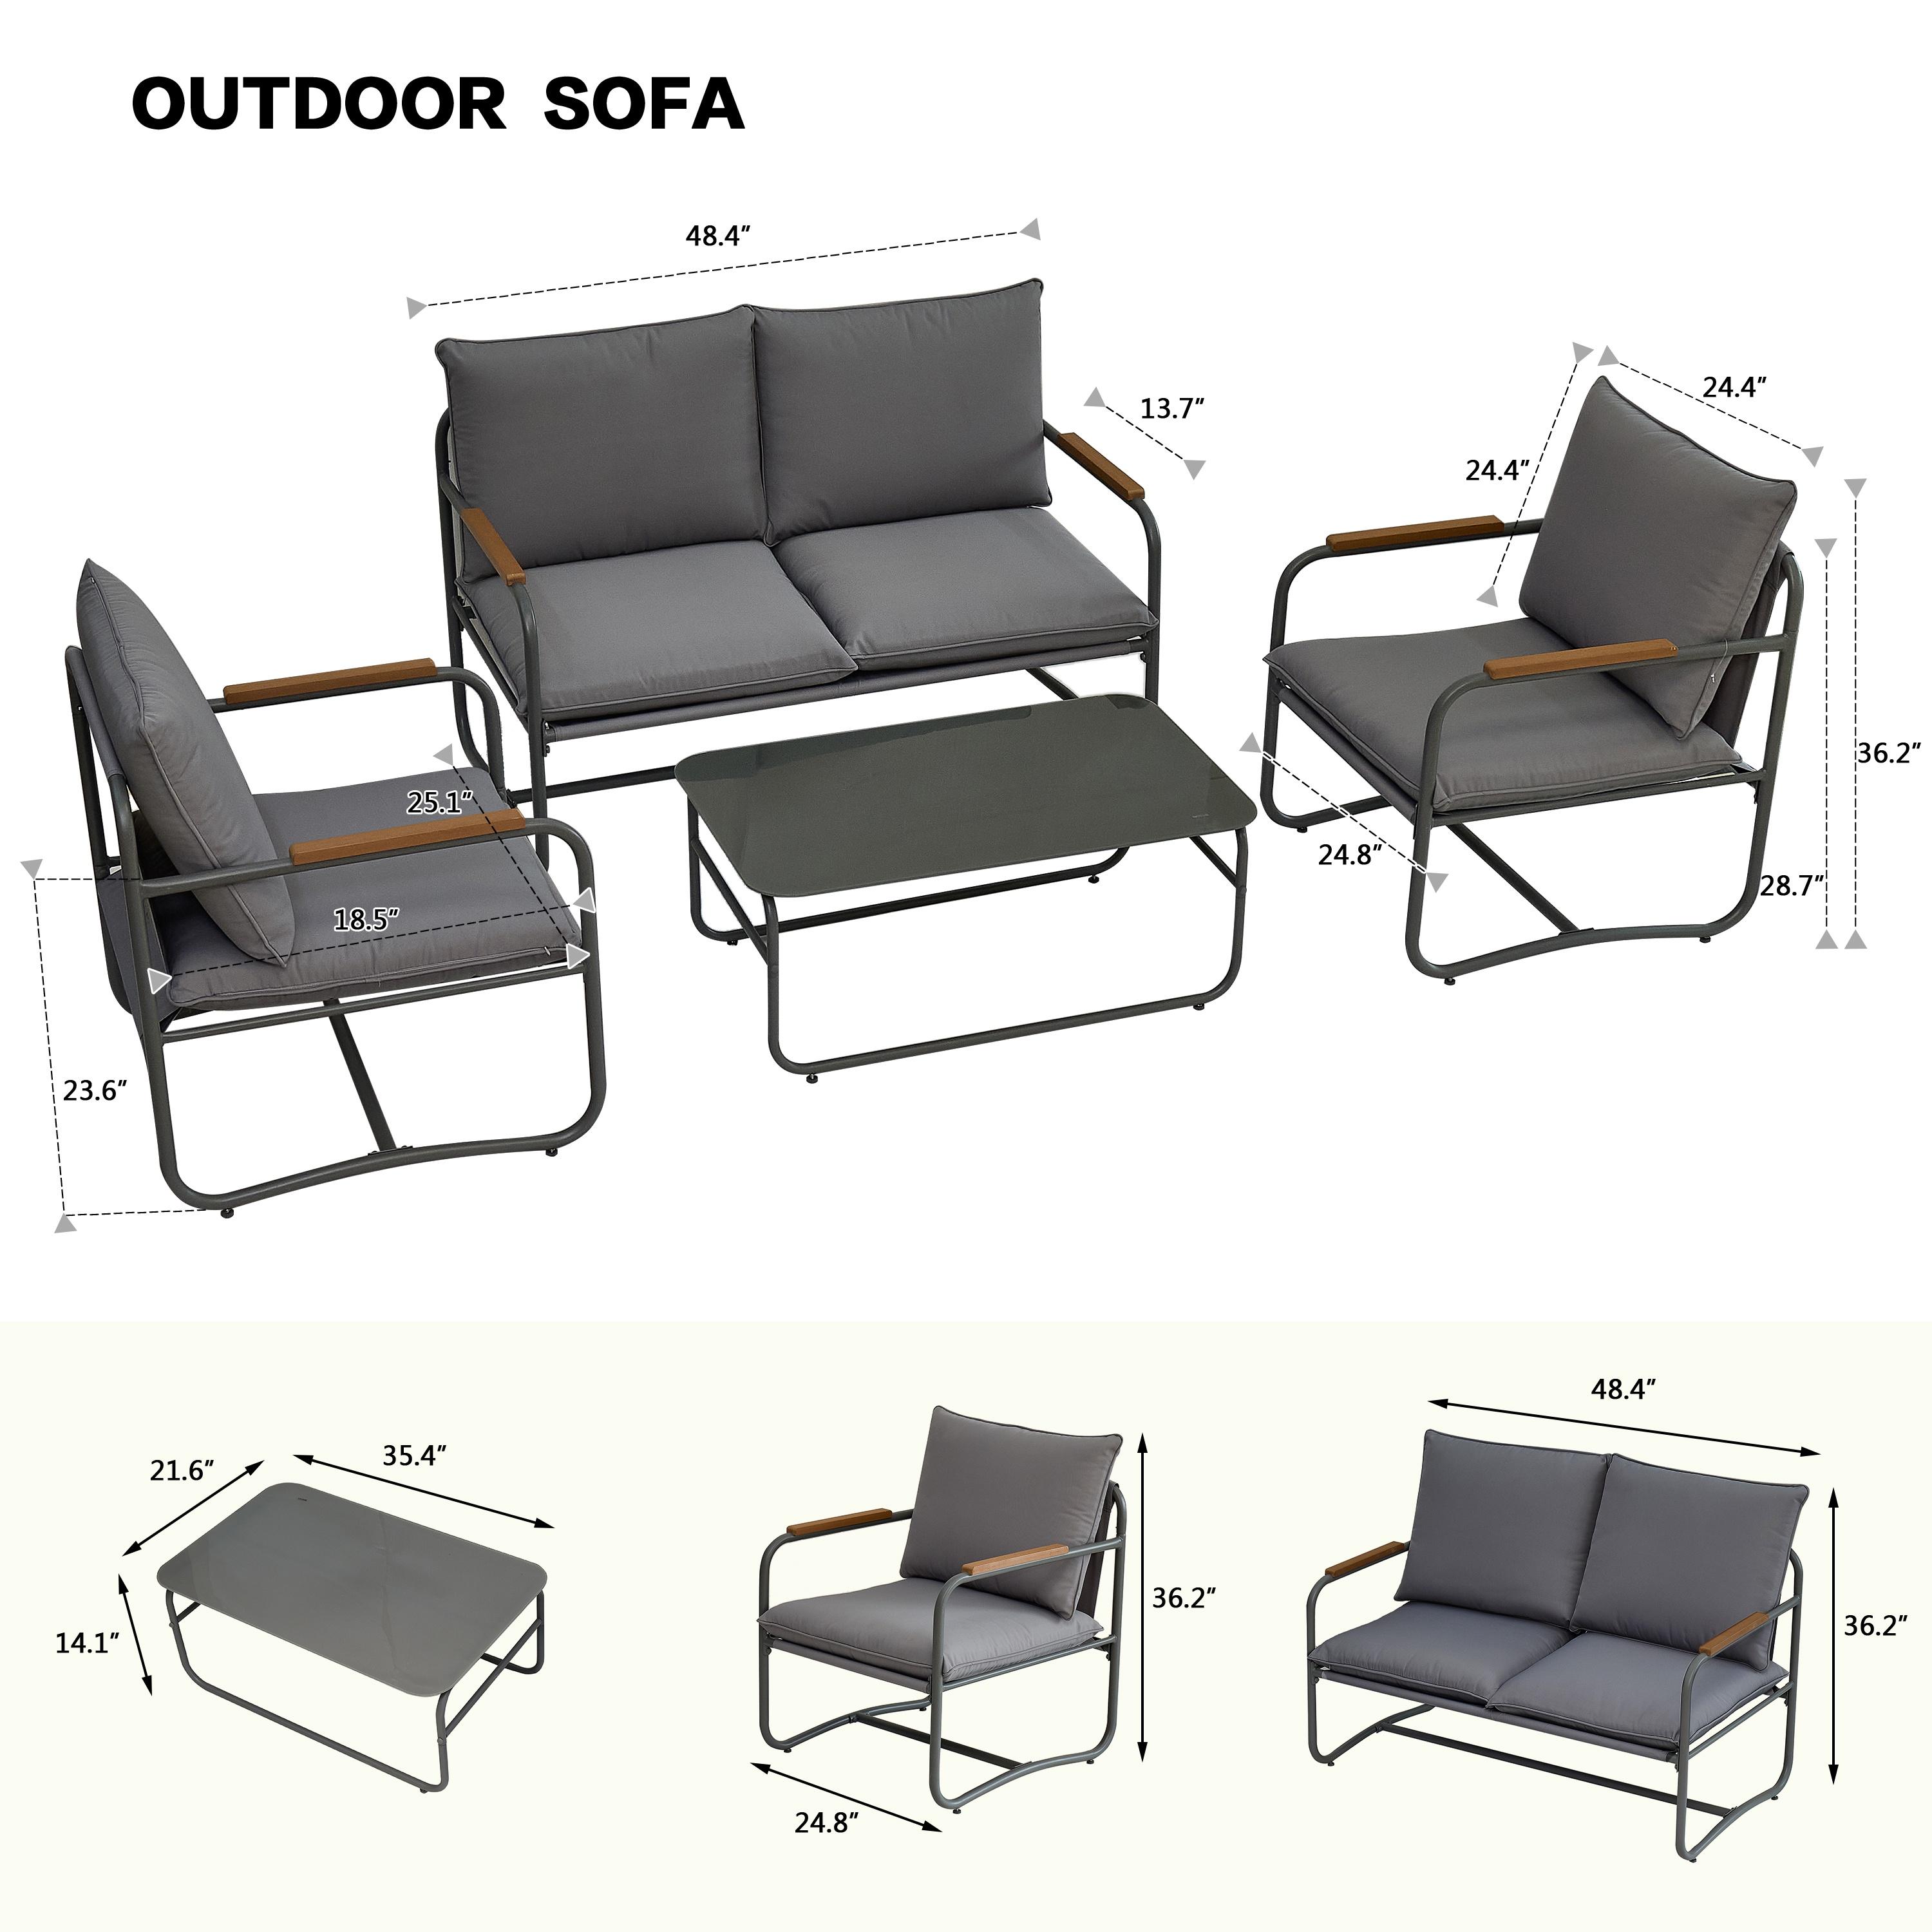 Syngar 4 Piece Patio Furniture Sets, Sectional Furniture Set for Outside, Conversation Sofa Set with Coffee Table and Dark Gray Cushions, Outdoor All Weather Metal Chairs Set for Yard, Poolside, Deck - image 5 of 7